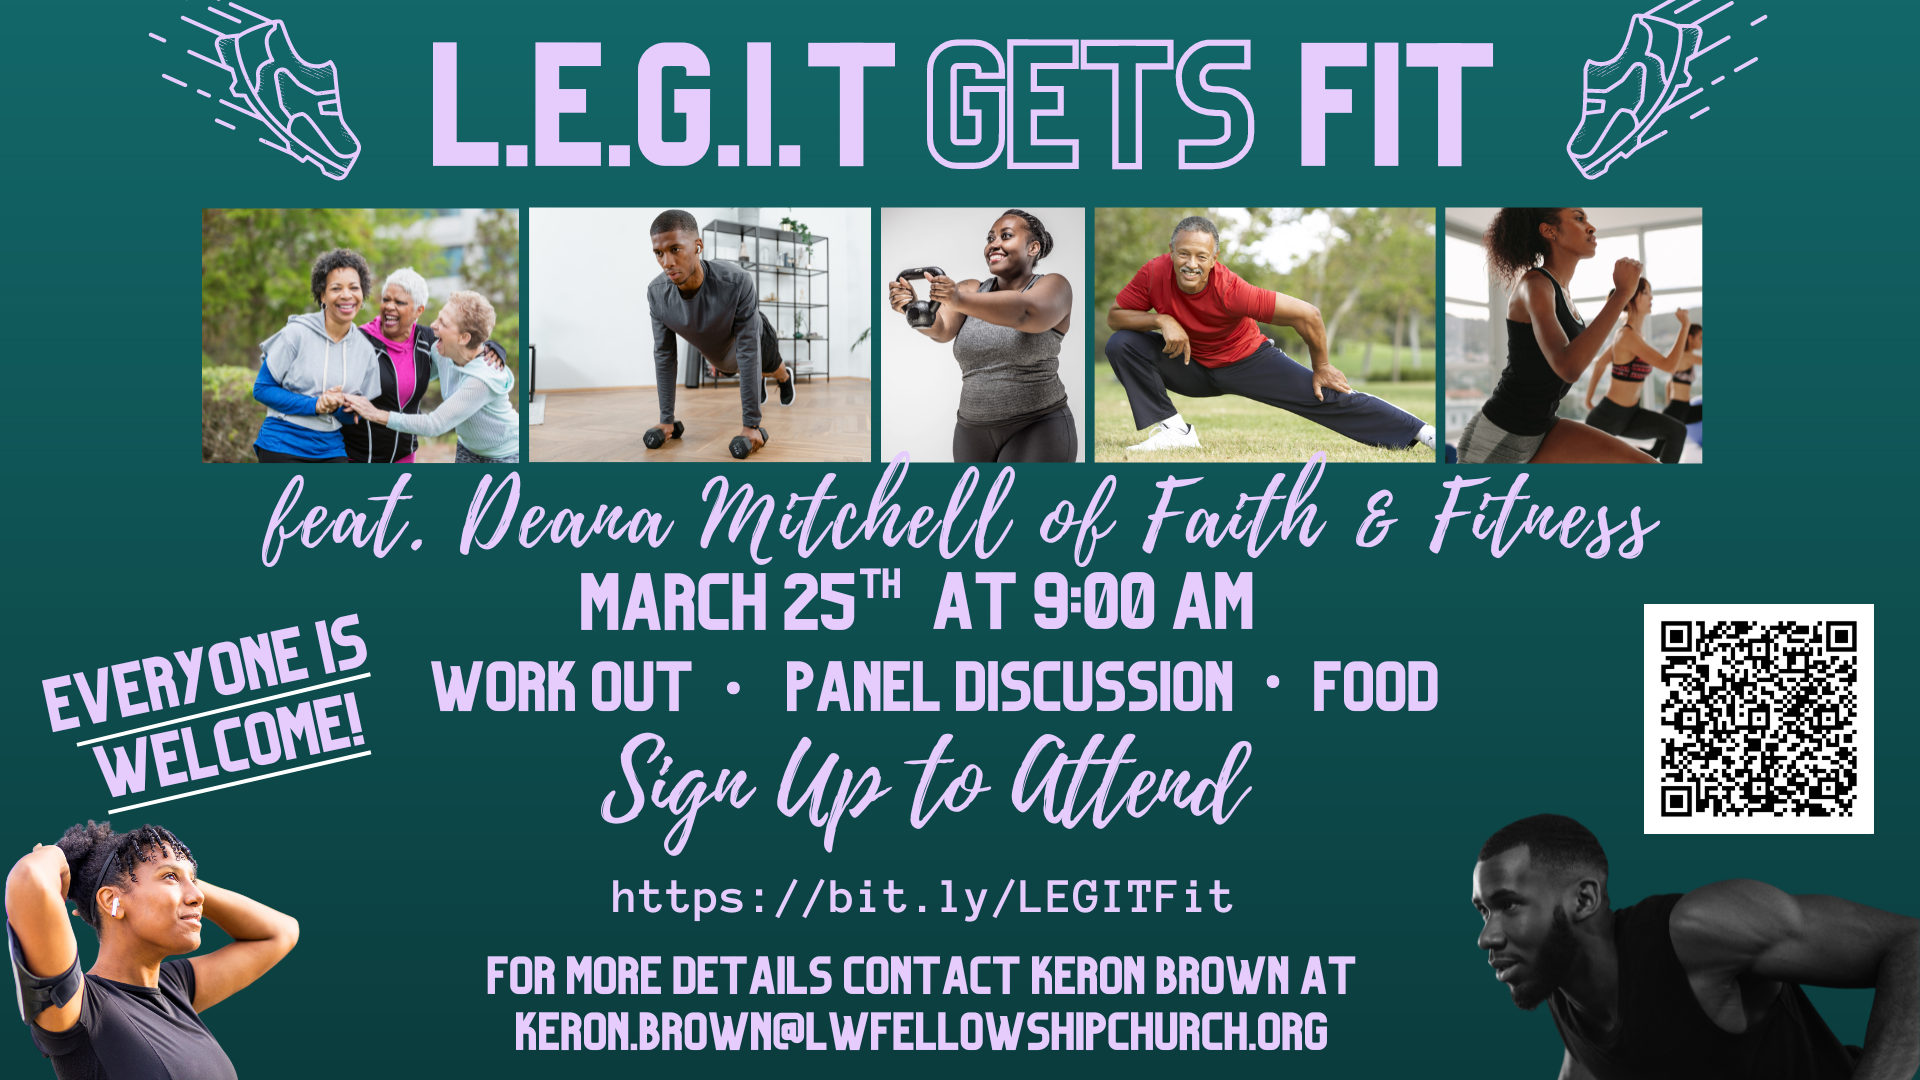 Get Fit With L.E.G.I.T March 25th head image